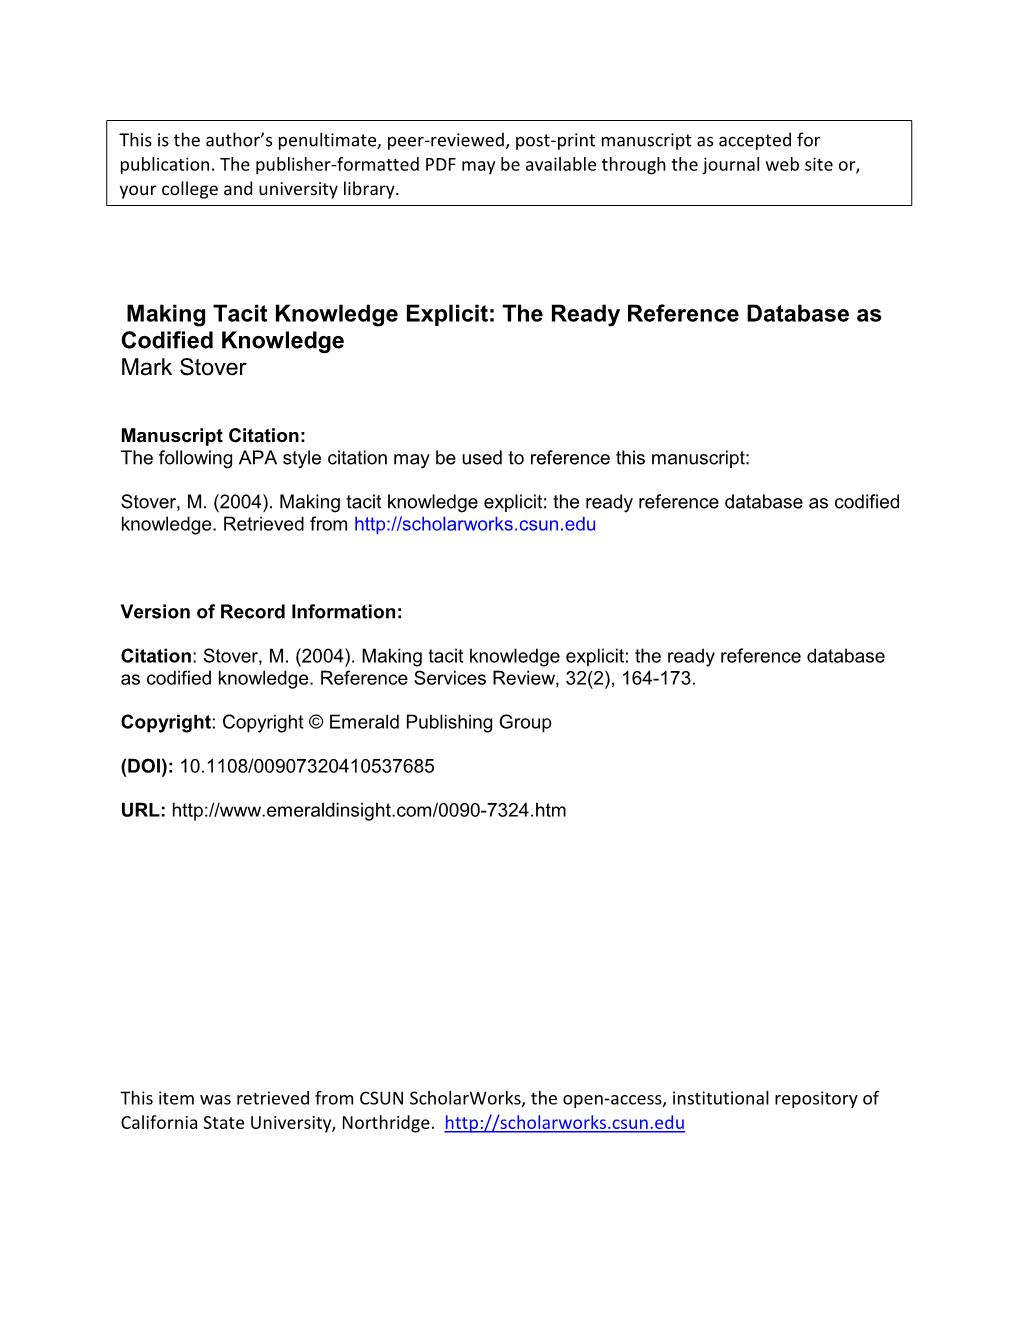 Making Tacit Knowledge Explicit: the Ready Reference Database As Codified Knowledge Mark Stover